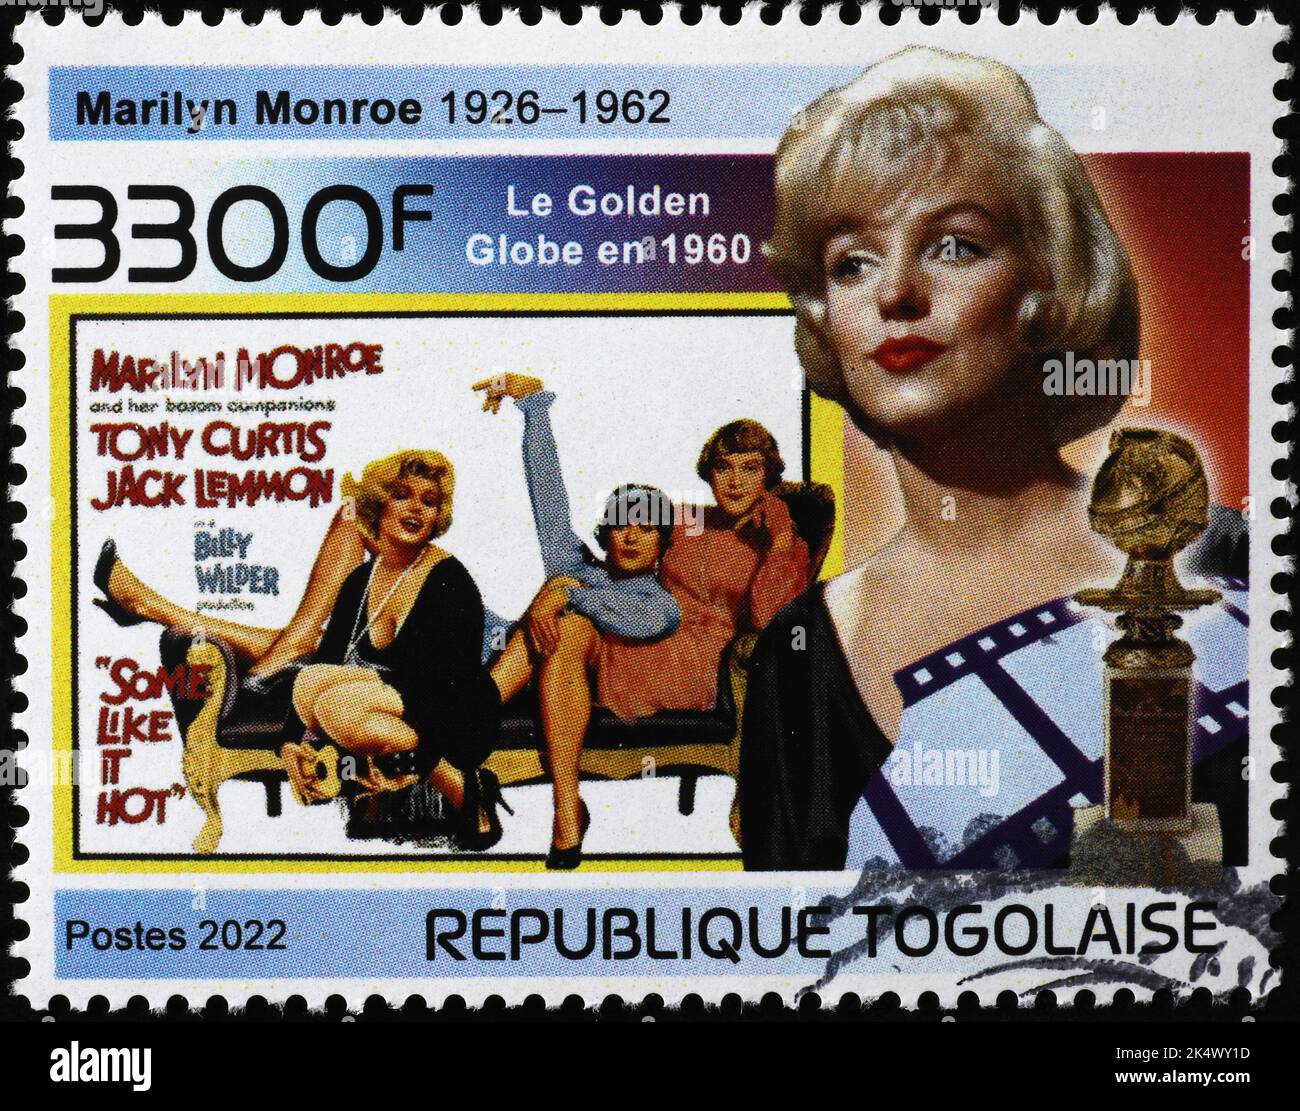 Movie 'Some like it hot' with Marilyn Monroe on stamp Stock Photo - Alamy